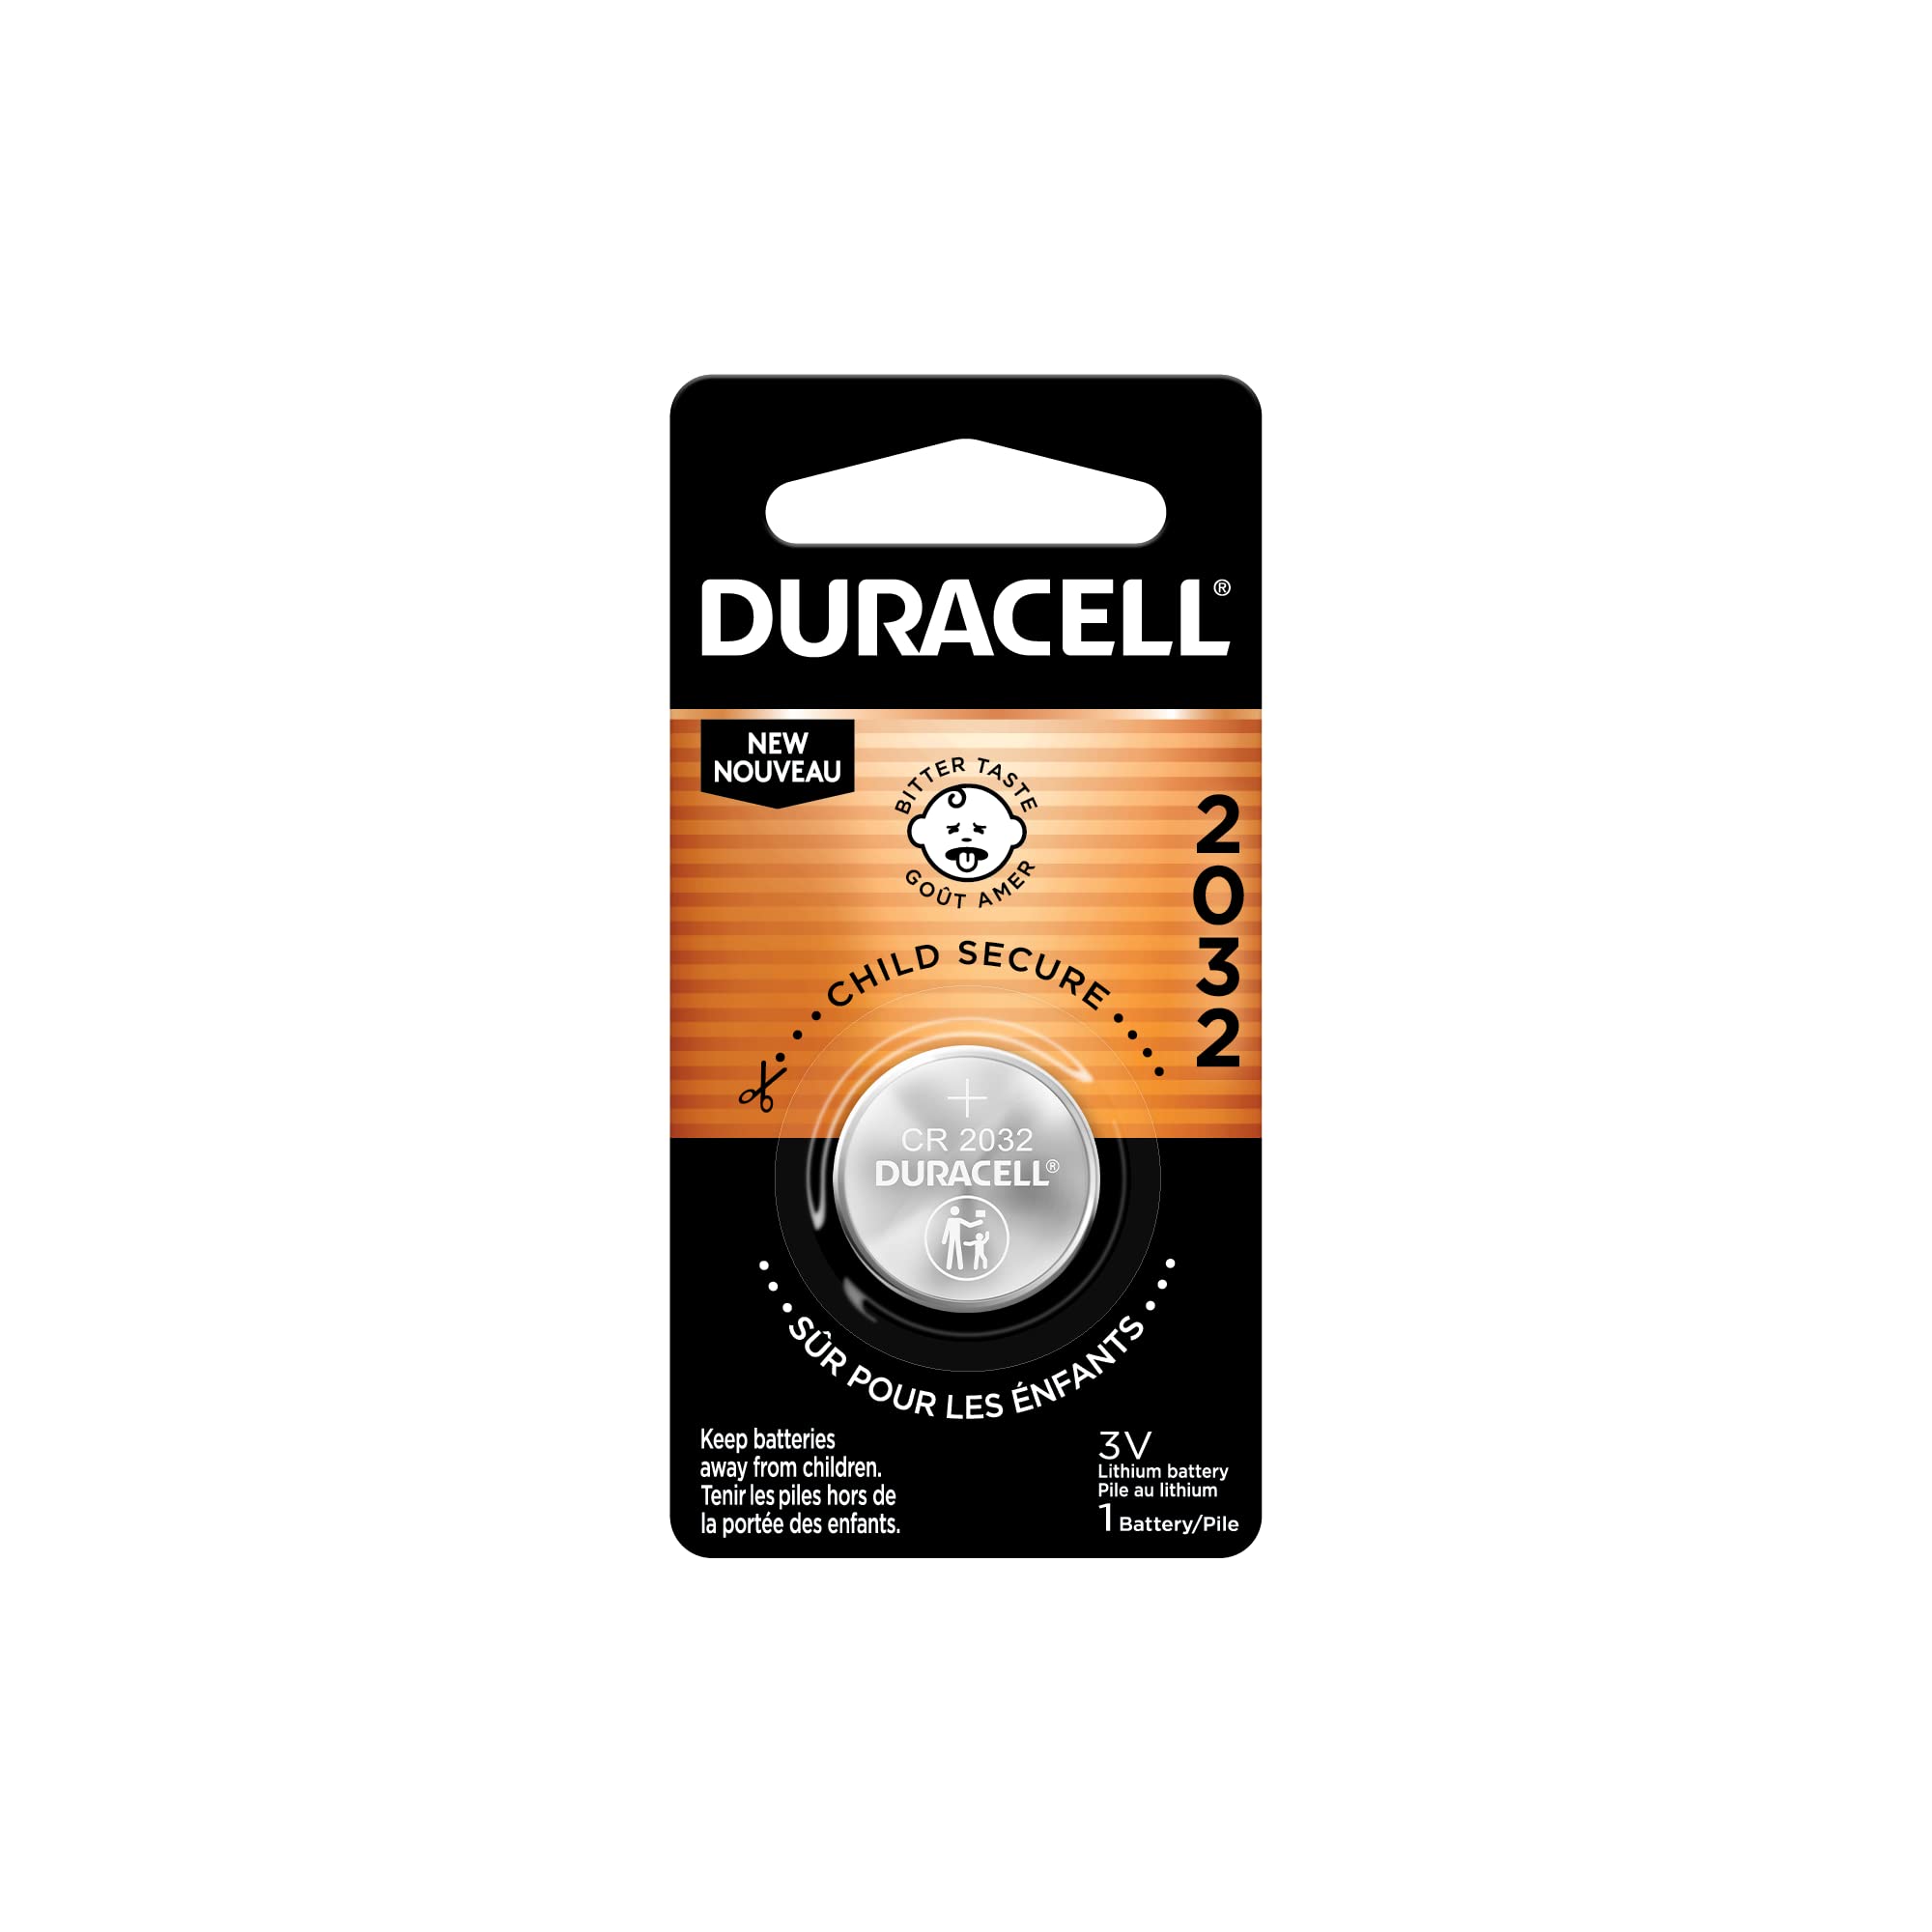 kulstof ske skære ned Duracell CR2032 3V Lithium Battery, Child Safety Features, 1 Count Pack,  Lithium Coin Battery for Key